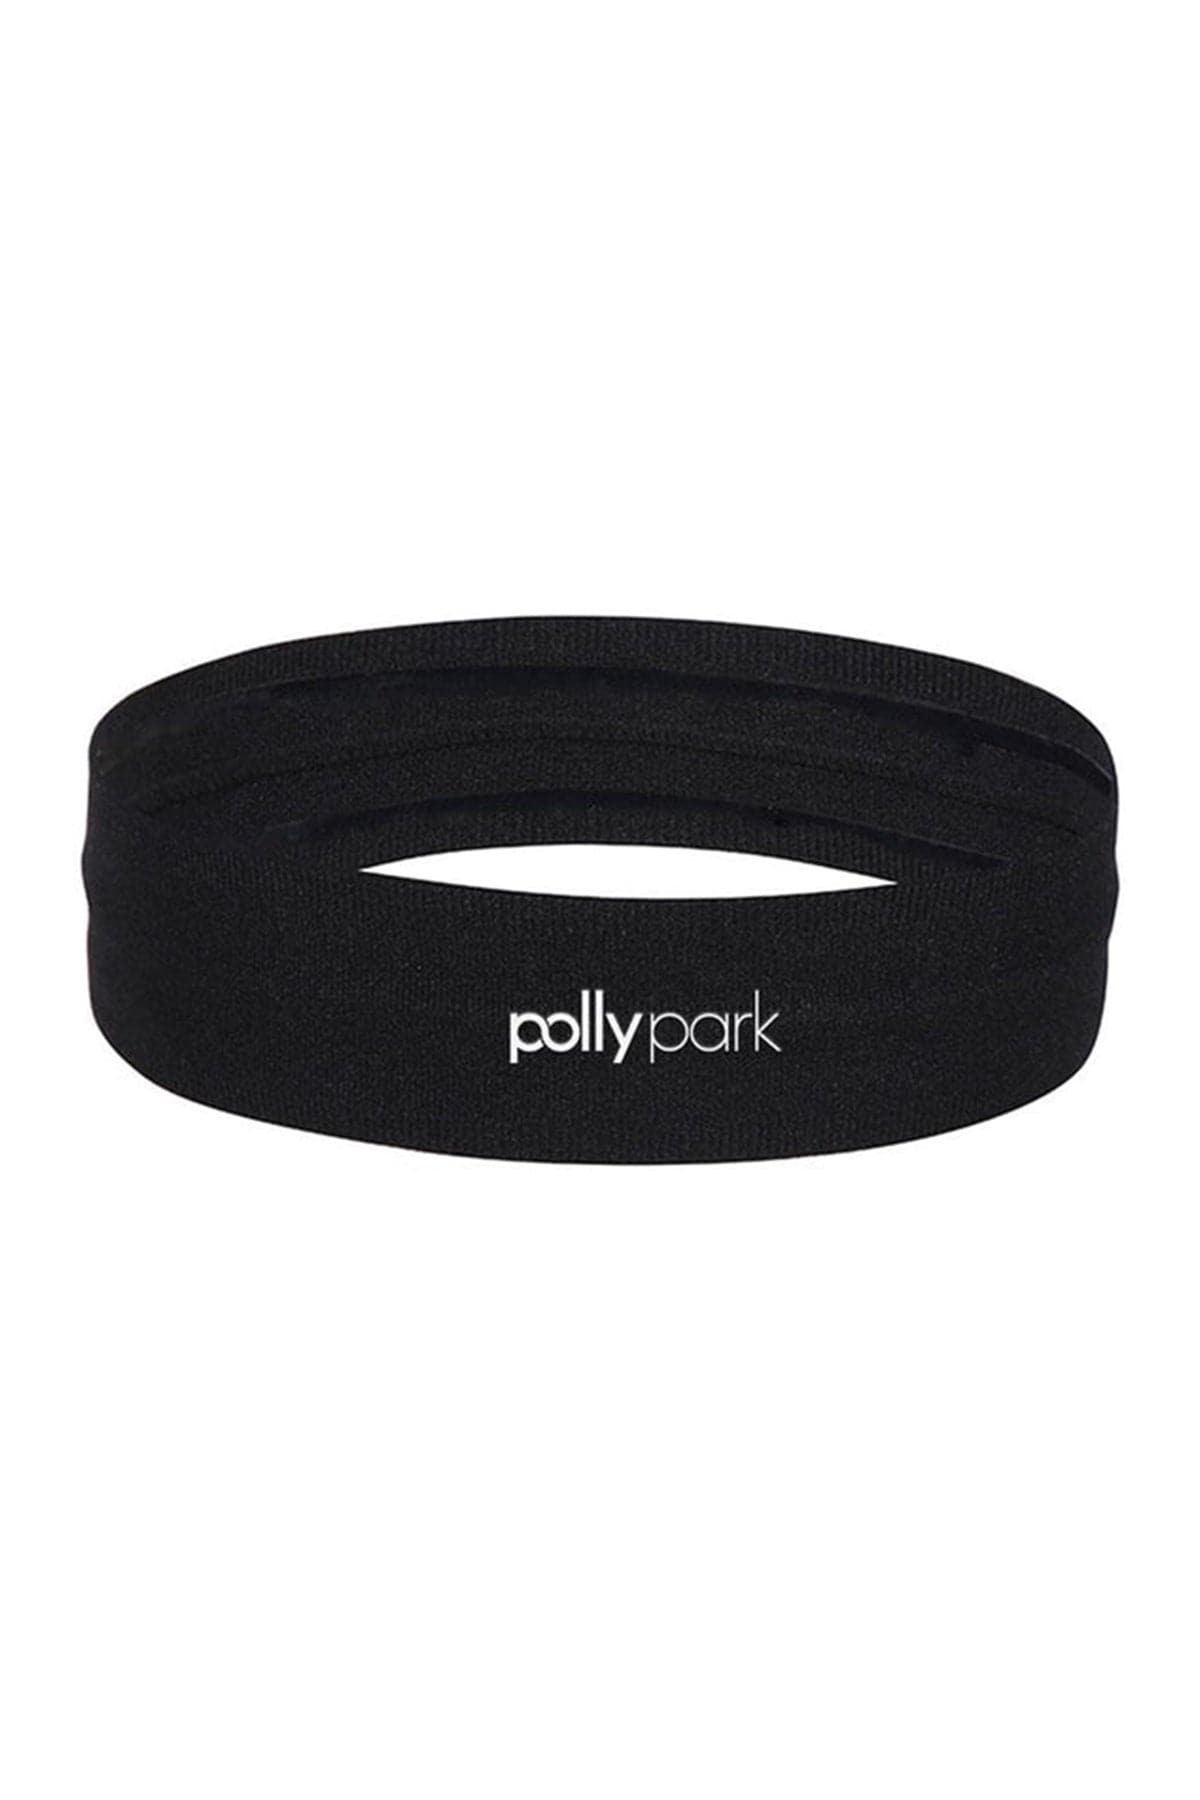 All-matched PollyPark Accessories – Pollypark